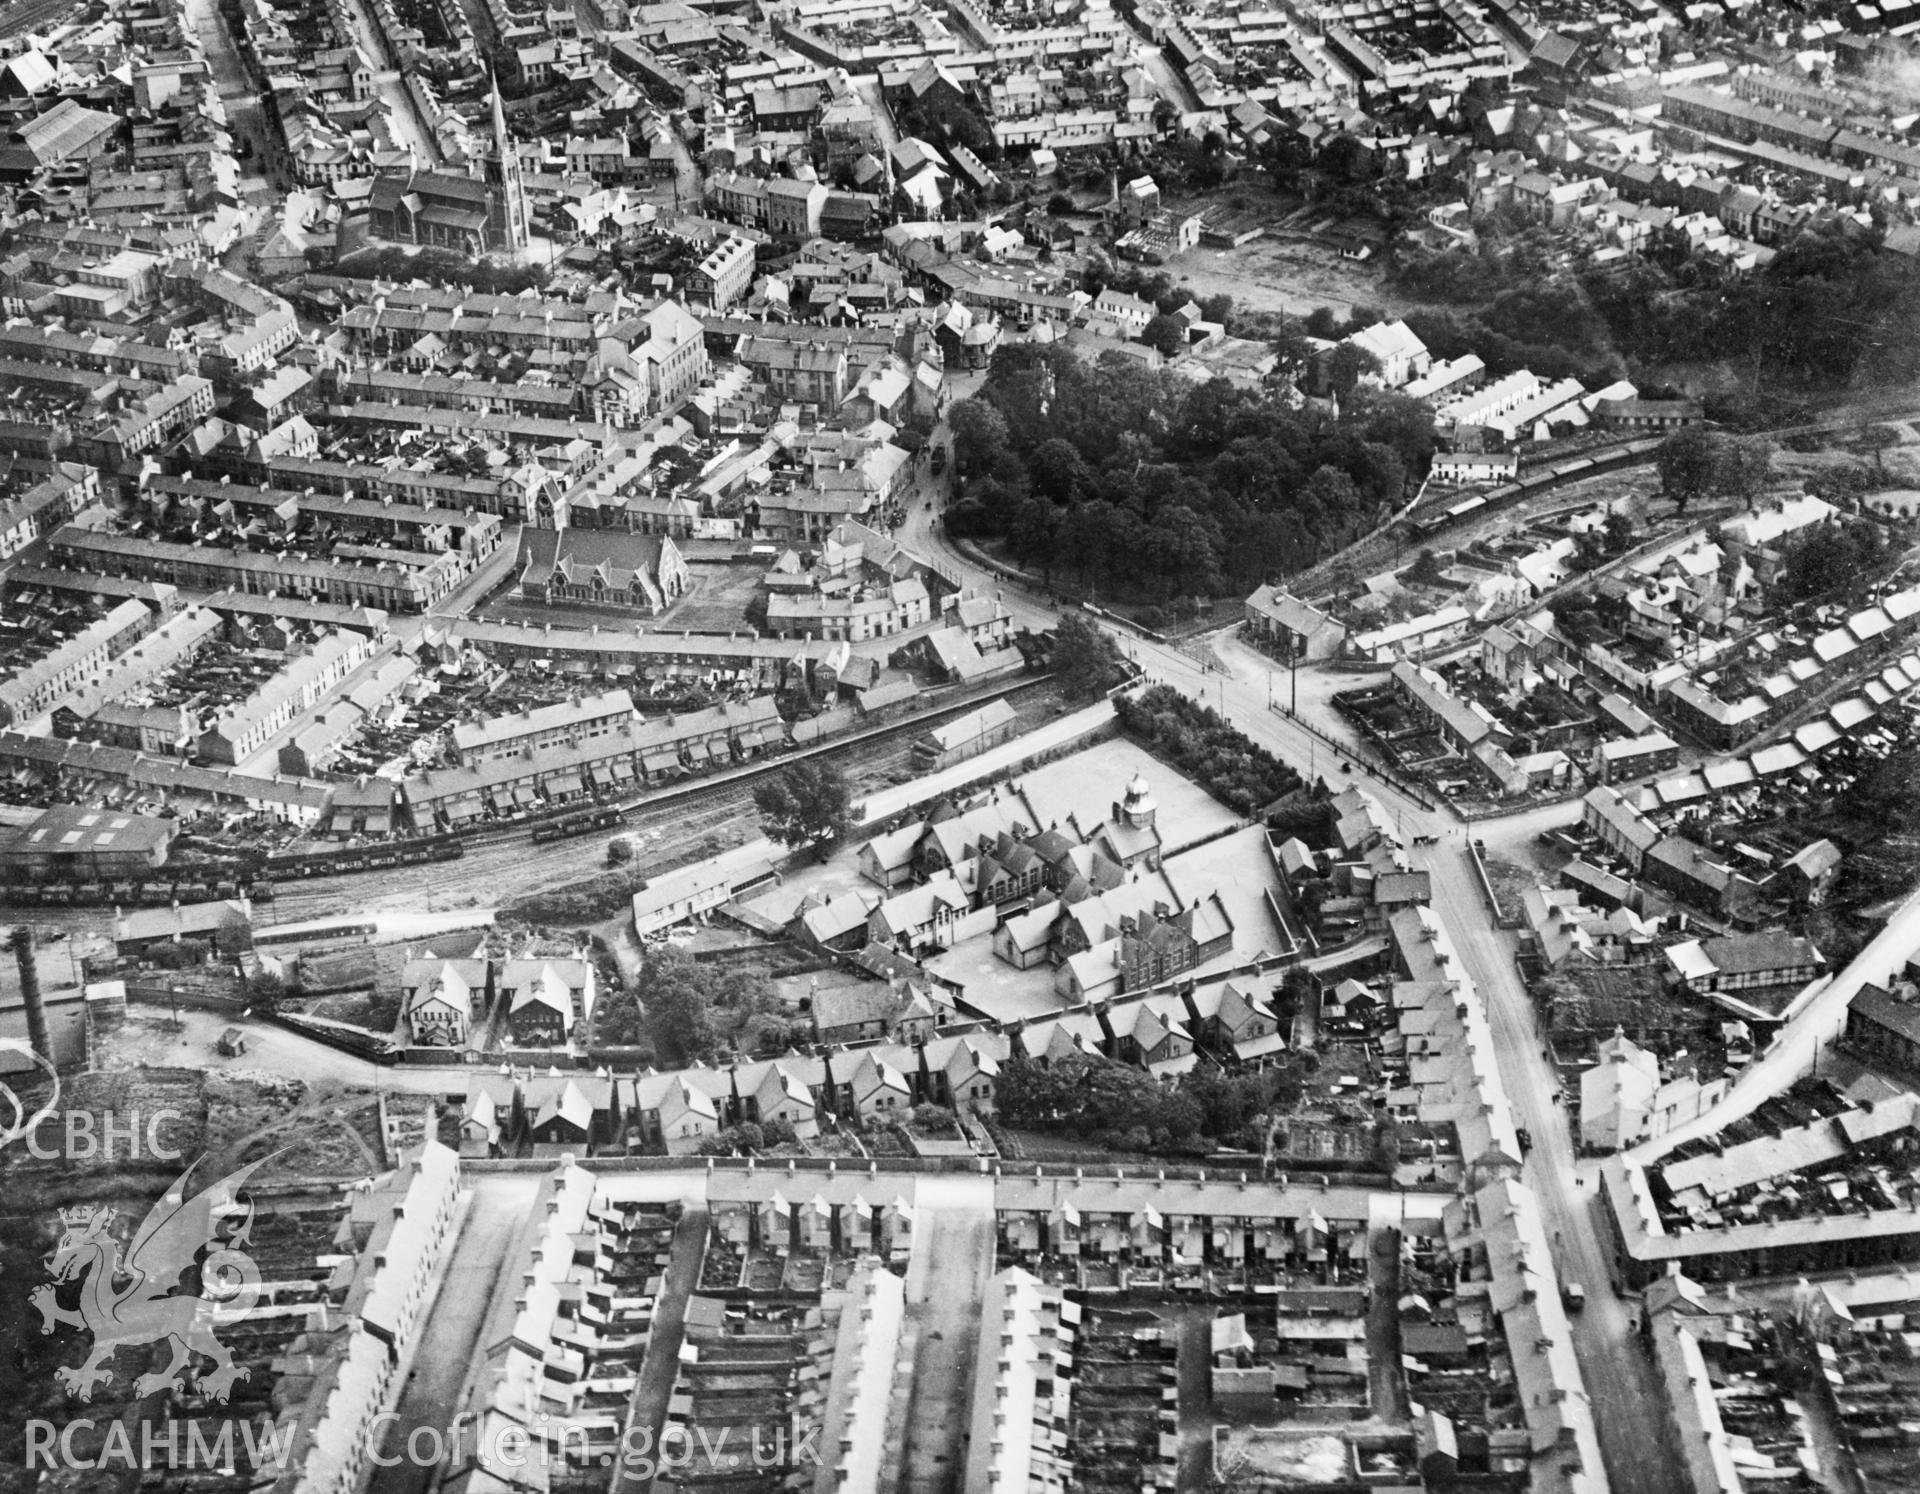 View of part of Aberdare showing St Elvan's church and Gadlys school. Oblique aerial photograph, 5?x4? BW glass plate.